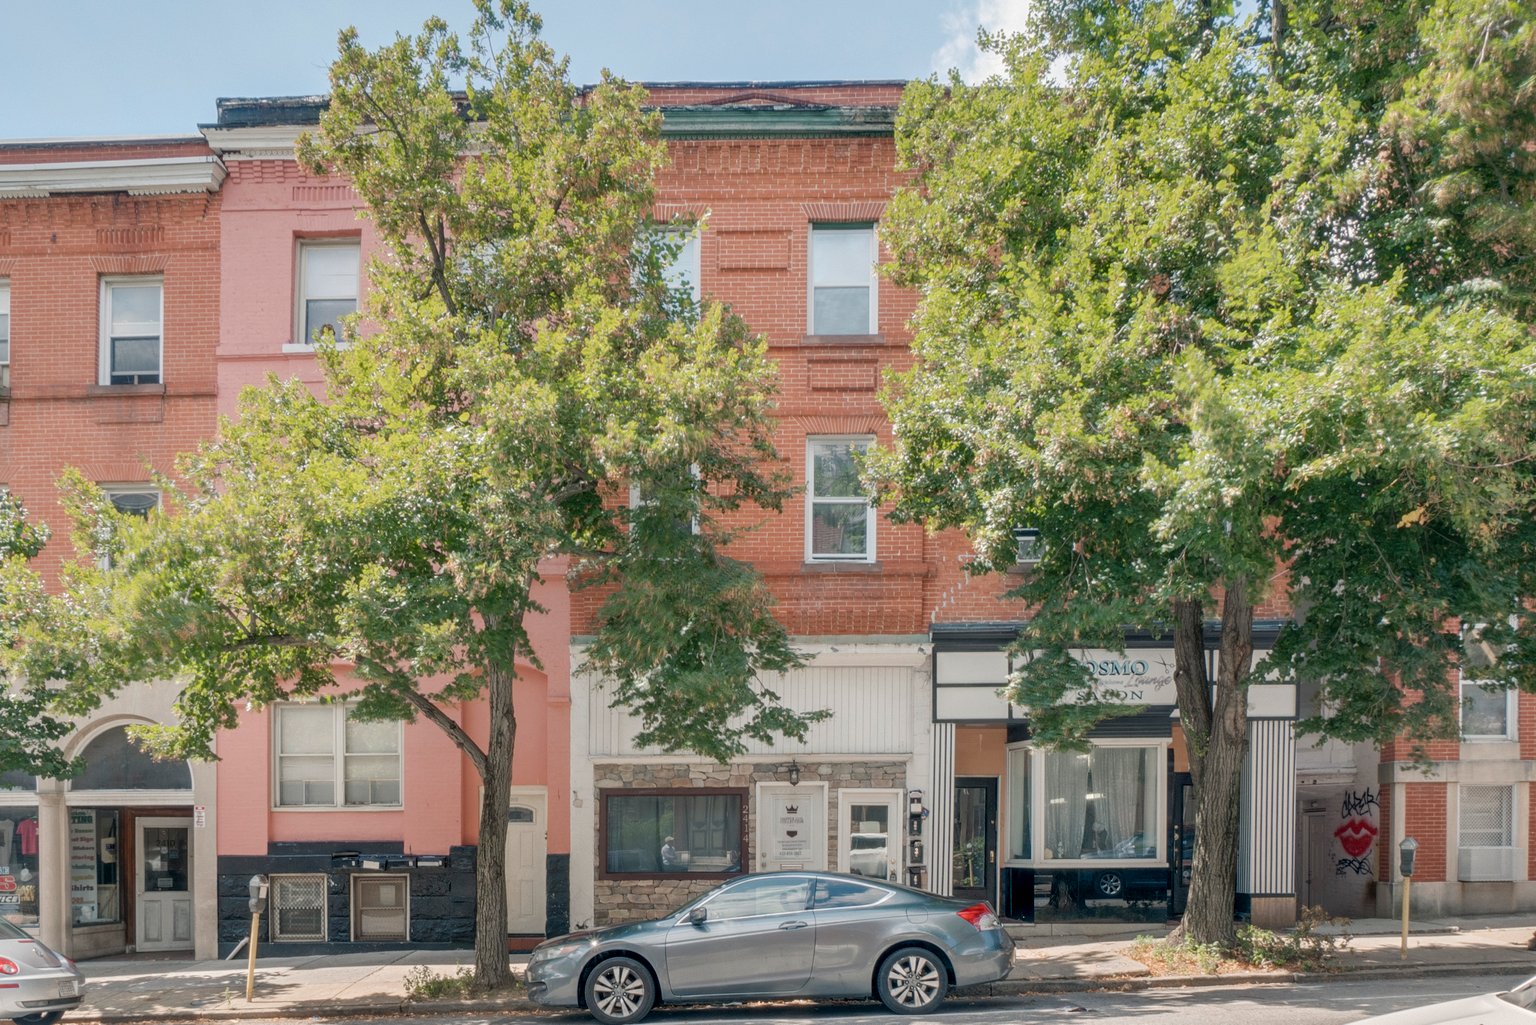 Auction Sale: 5-Unit Mixed Use in Upcoming Old Goucher